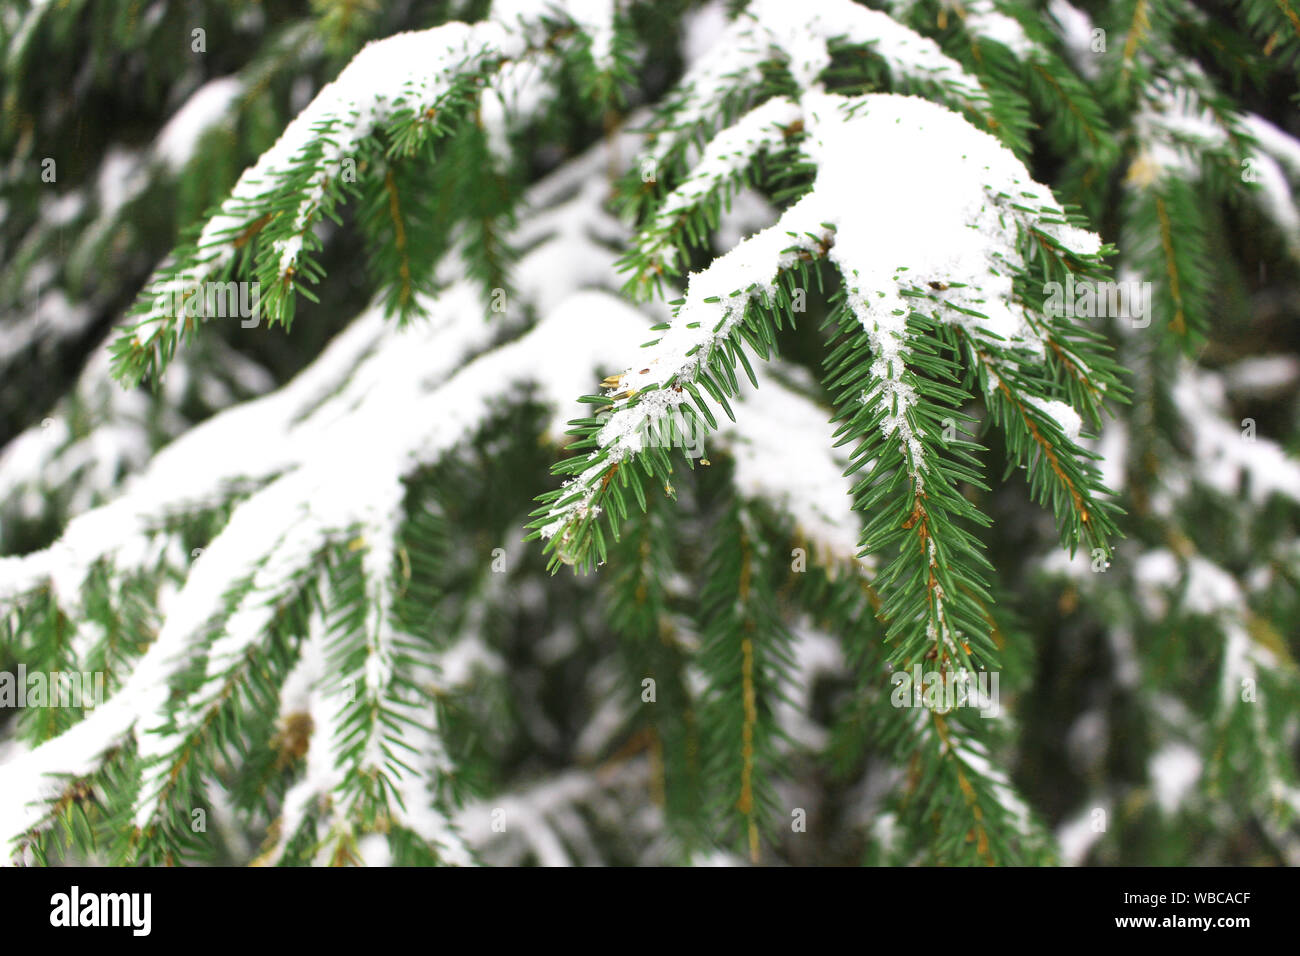 close up of snow covered fir or spruce tree branches and needles (Picea abies) Stock Photo